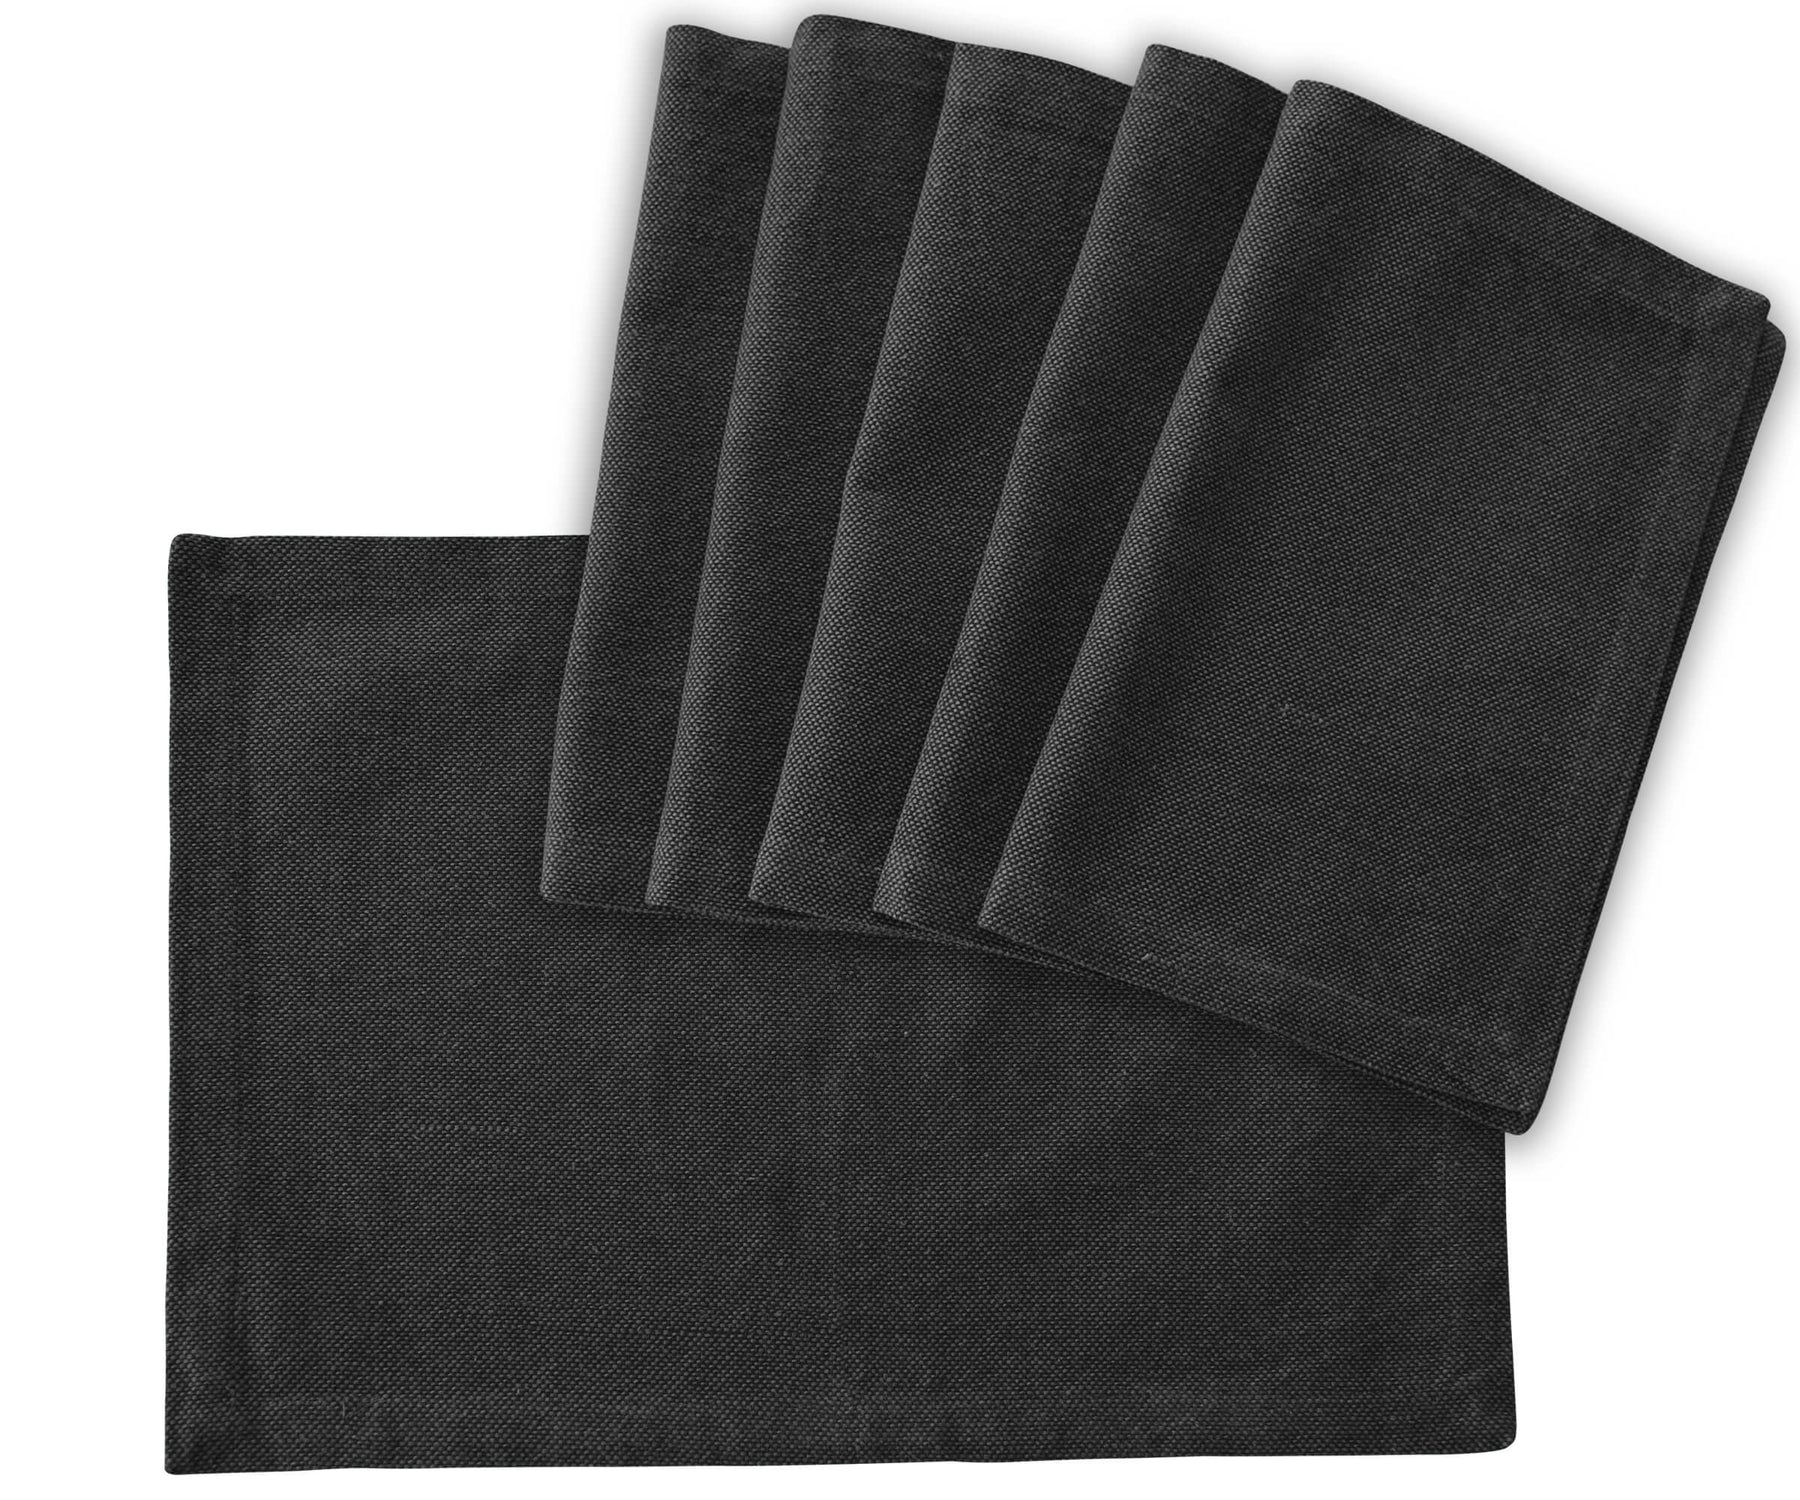 Black washable Placemat set of 6 are folded and displayed. 